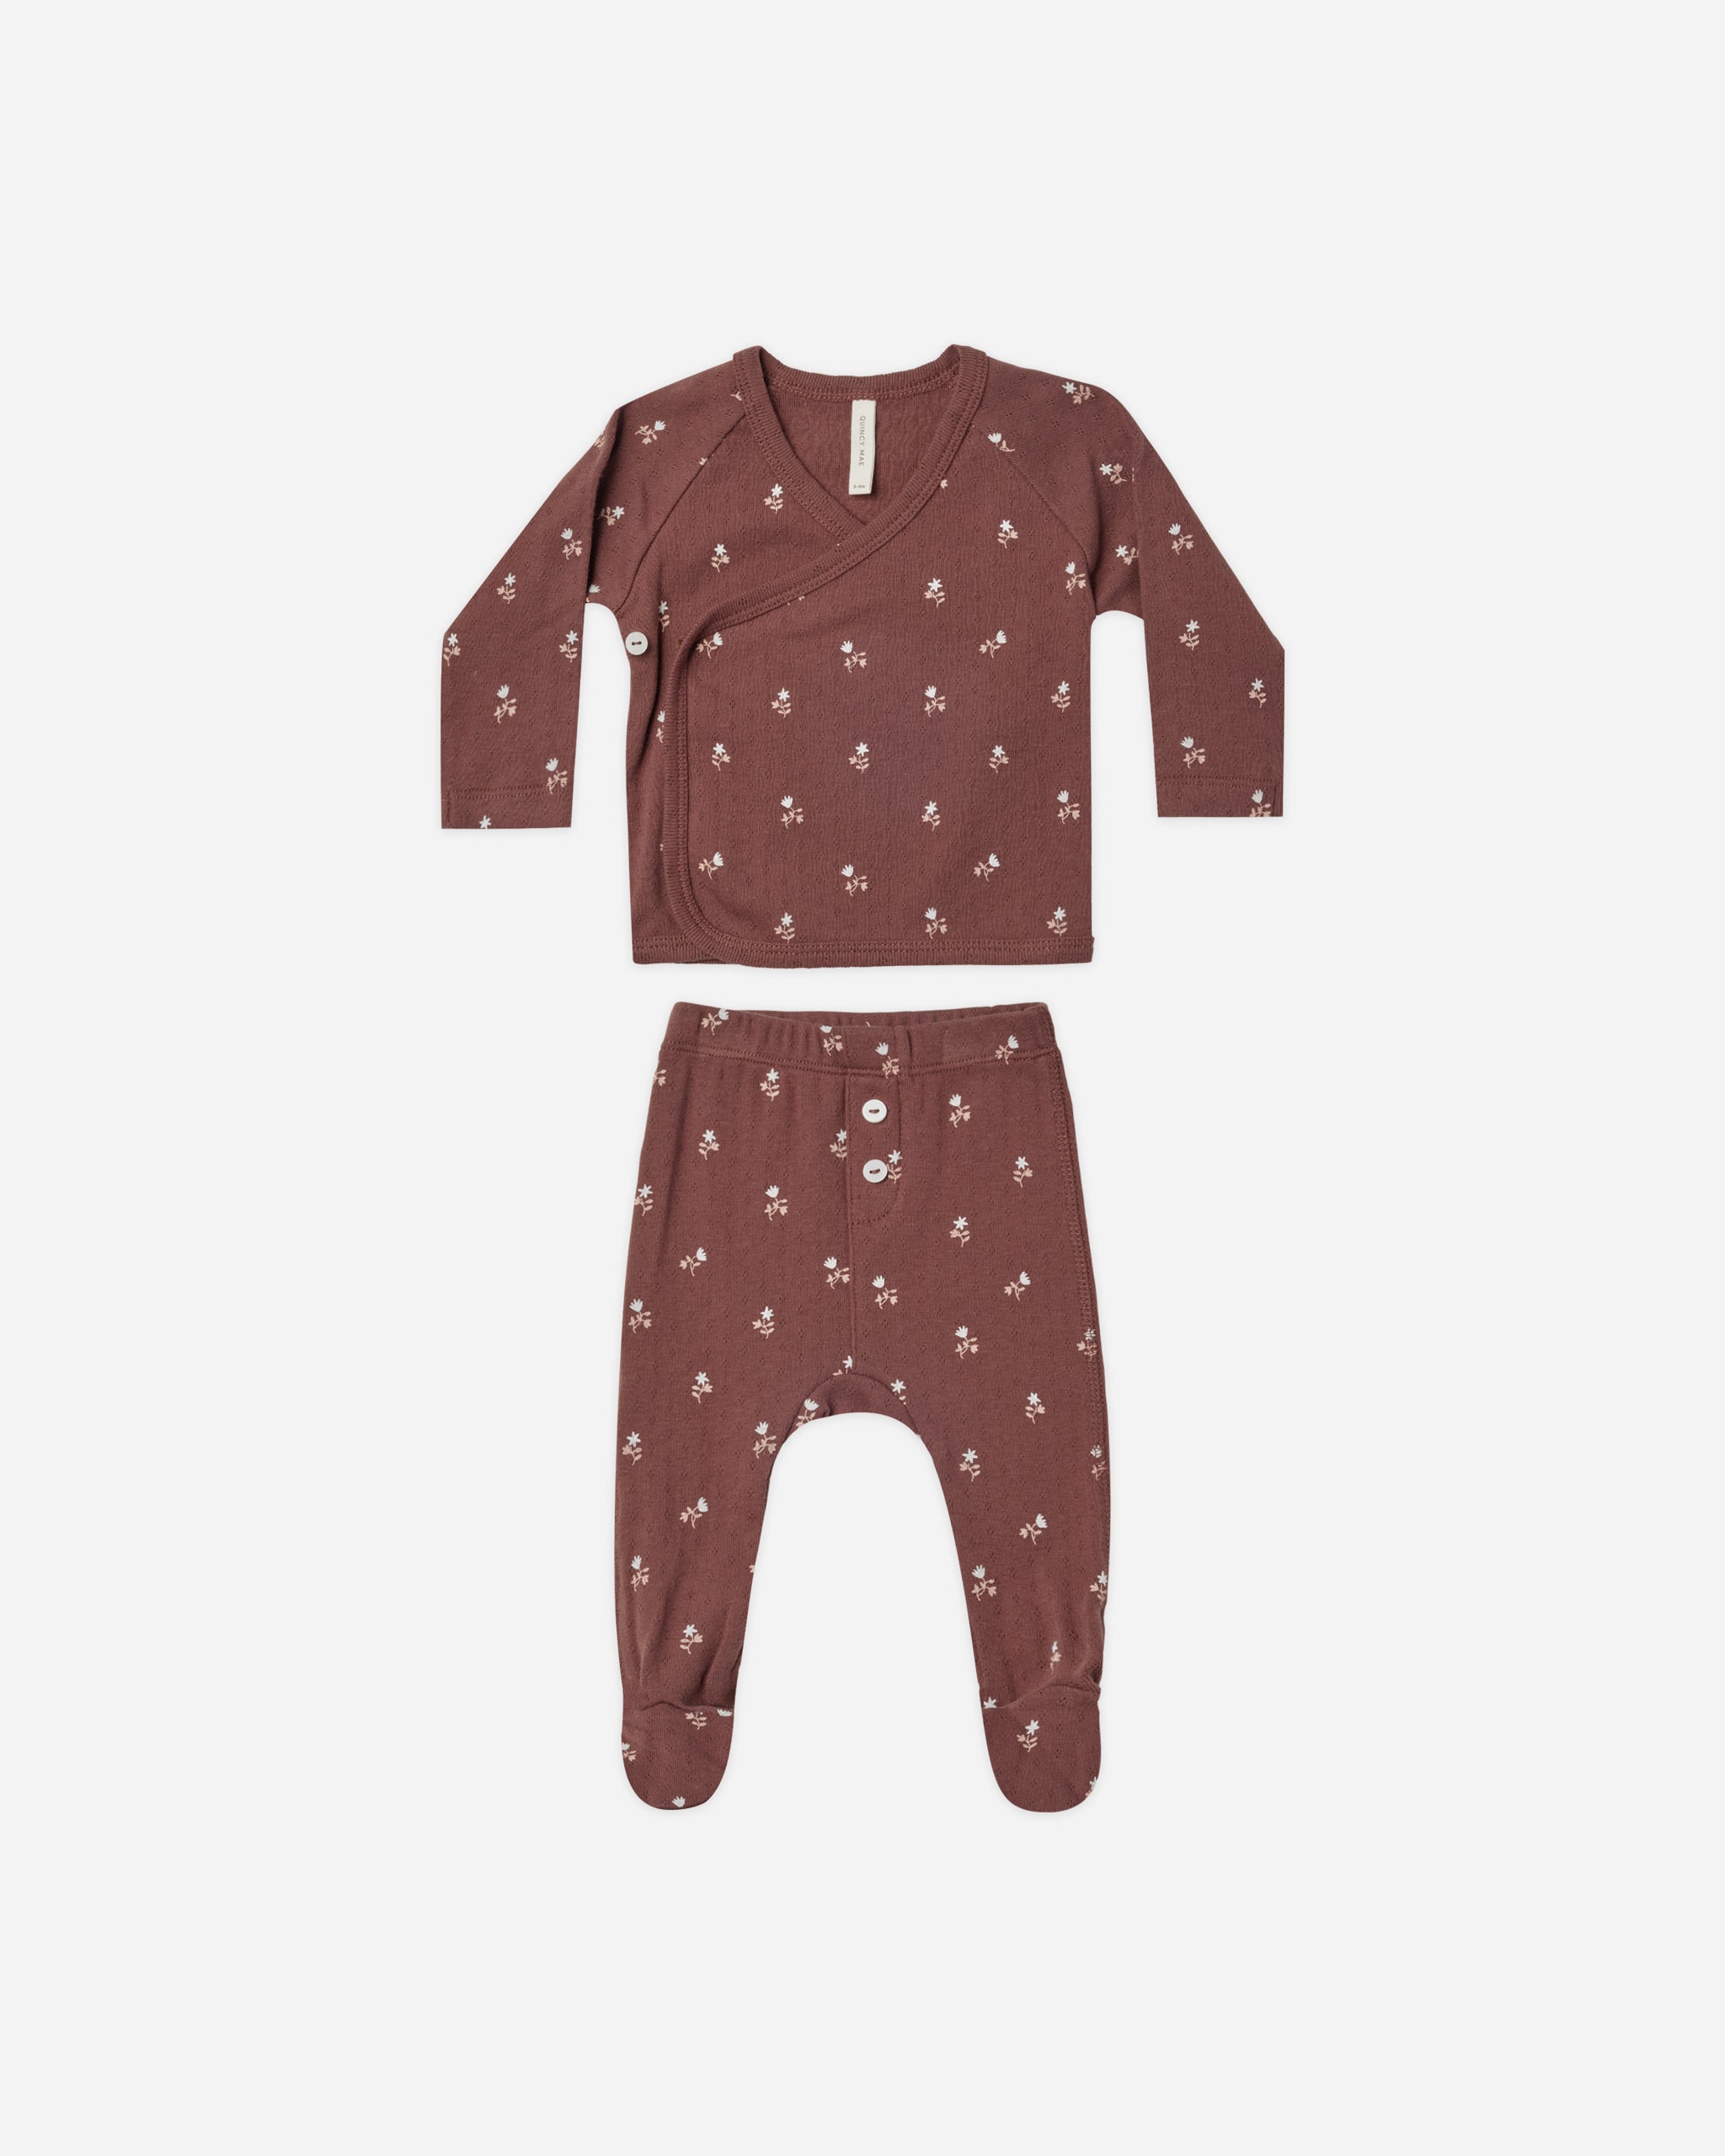 Wrap Top + Footed Pant Set || Plum Fleur - Rylee + Cru | Kids Clothes | Trendy Baby Clothes | Modern Infant Outfits |